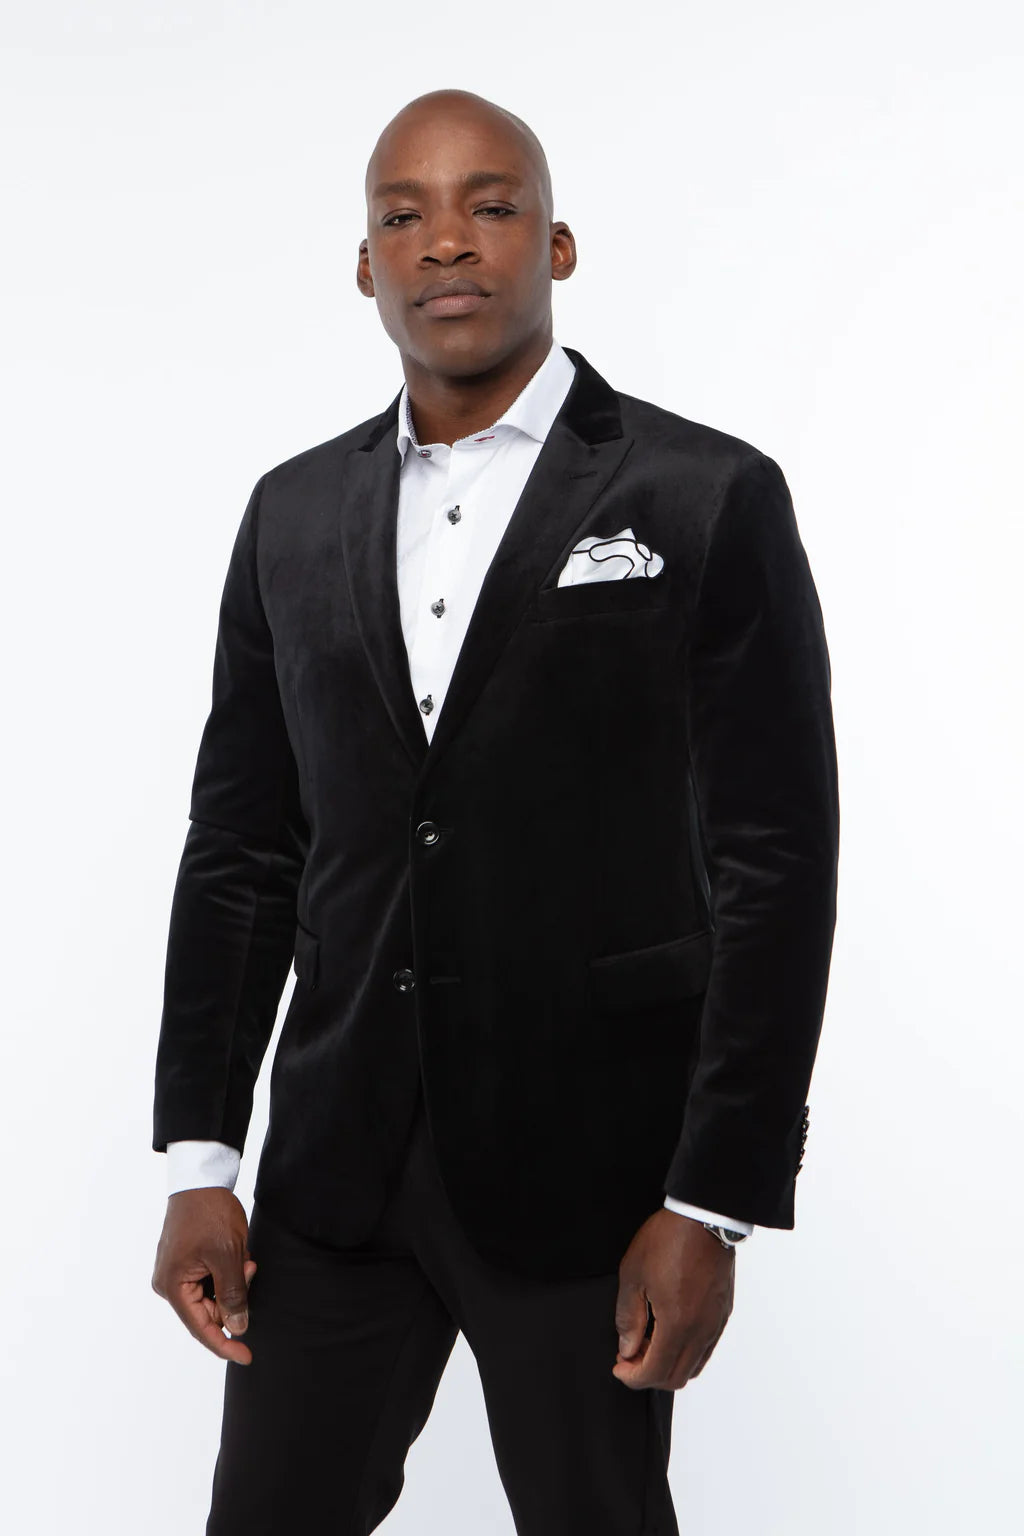 Simple, elegant, classic. The Exton Dinner Jacket is perfect for your next formal event.